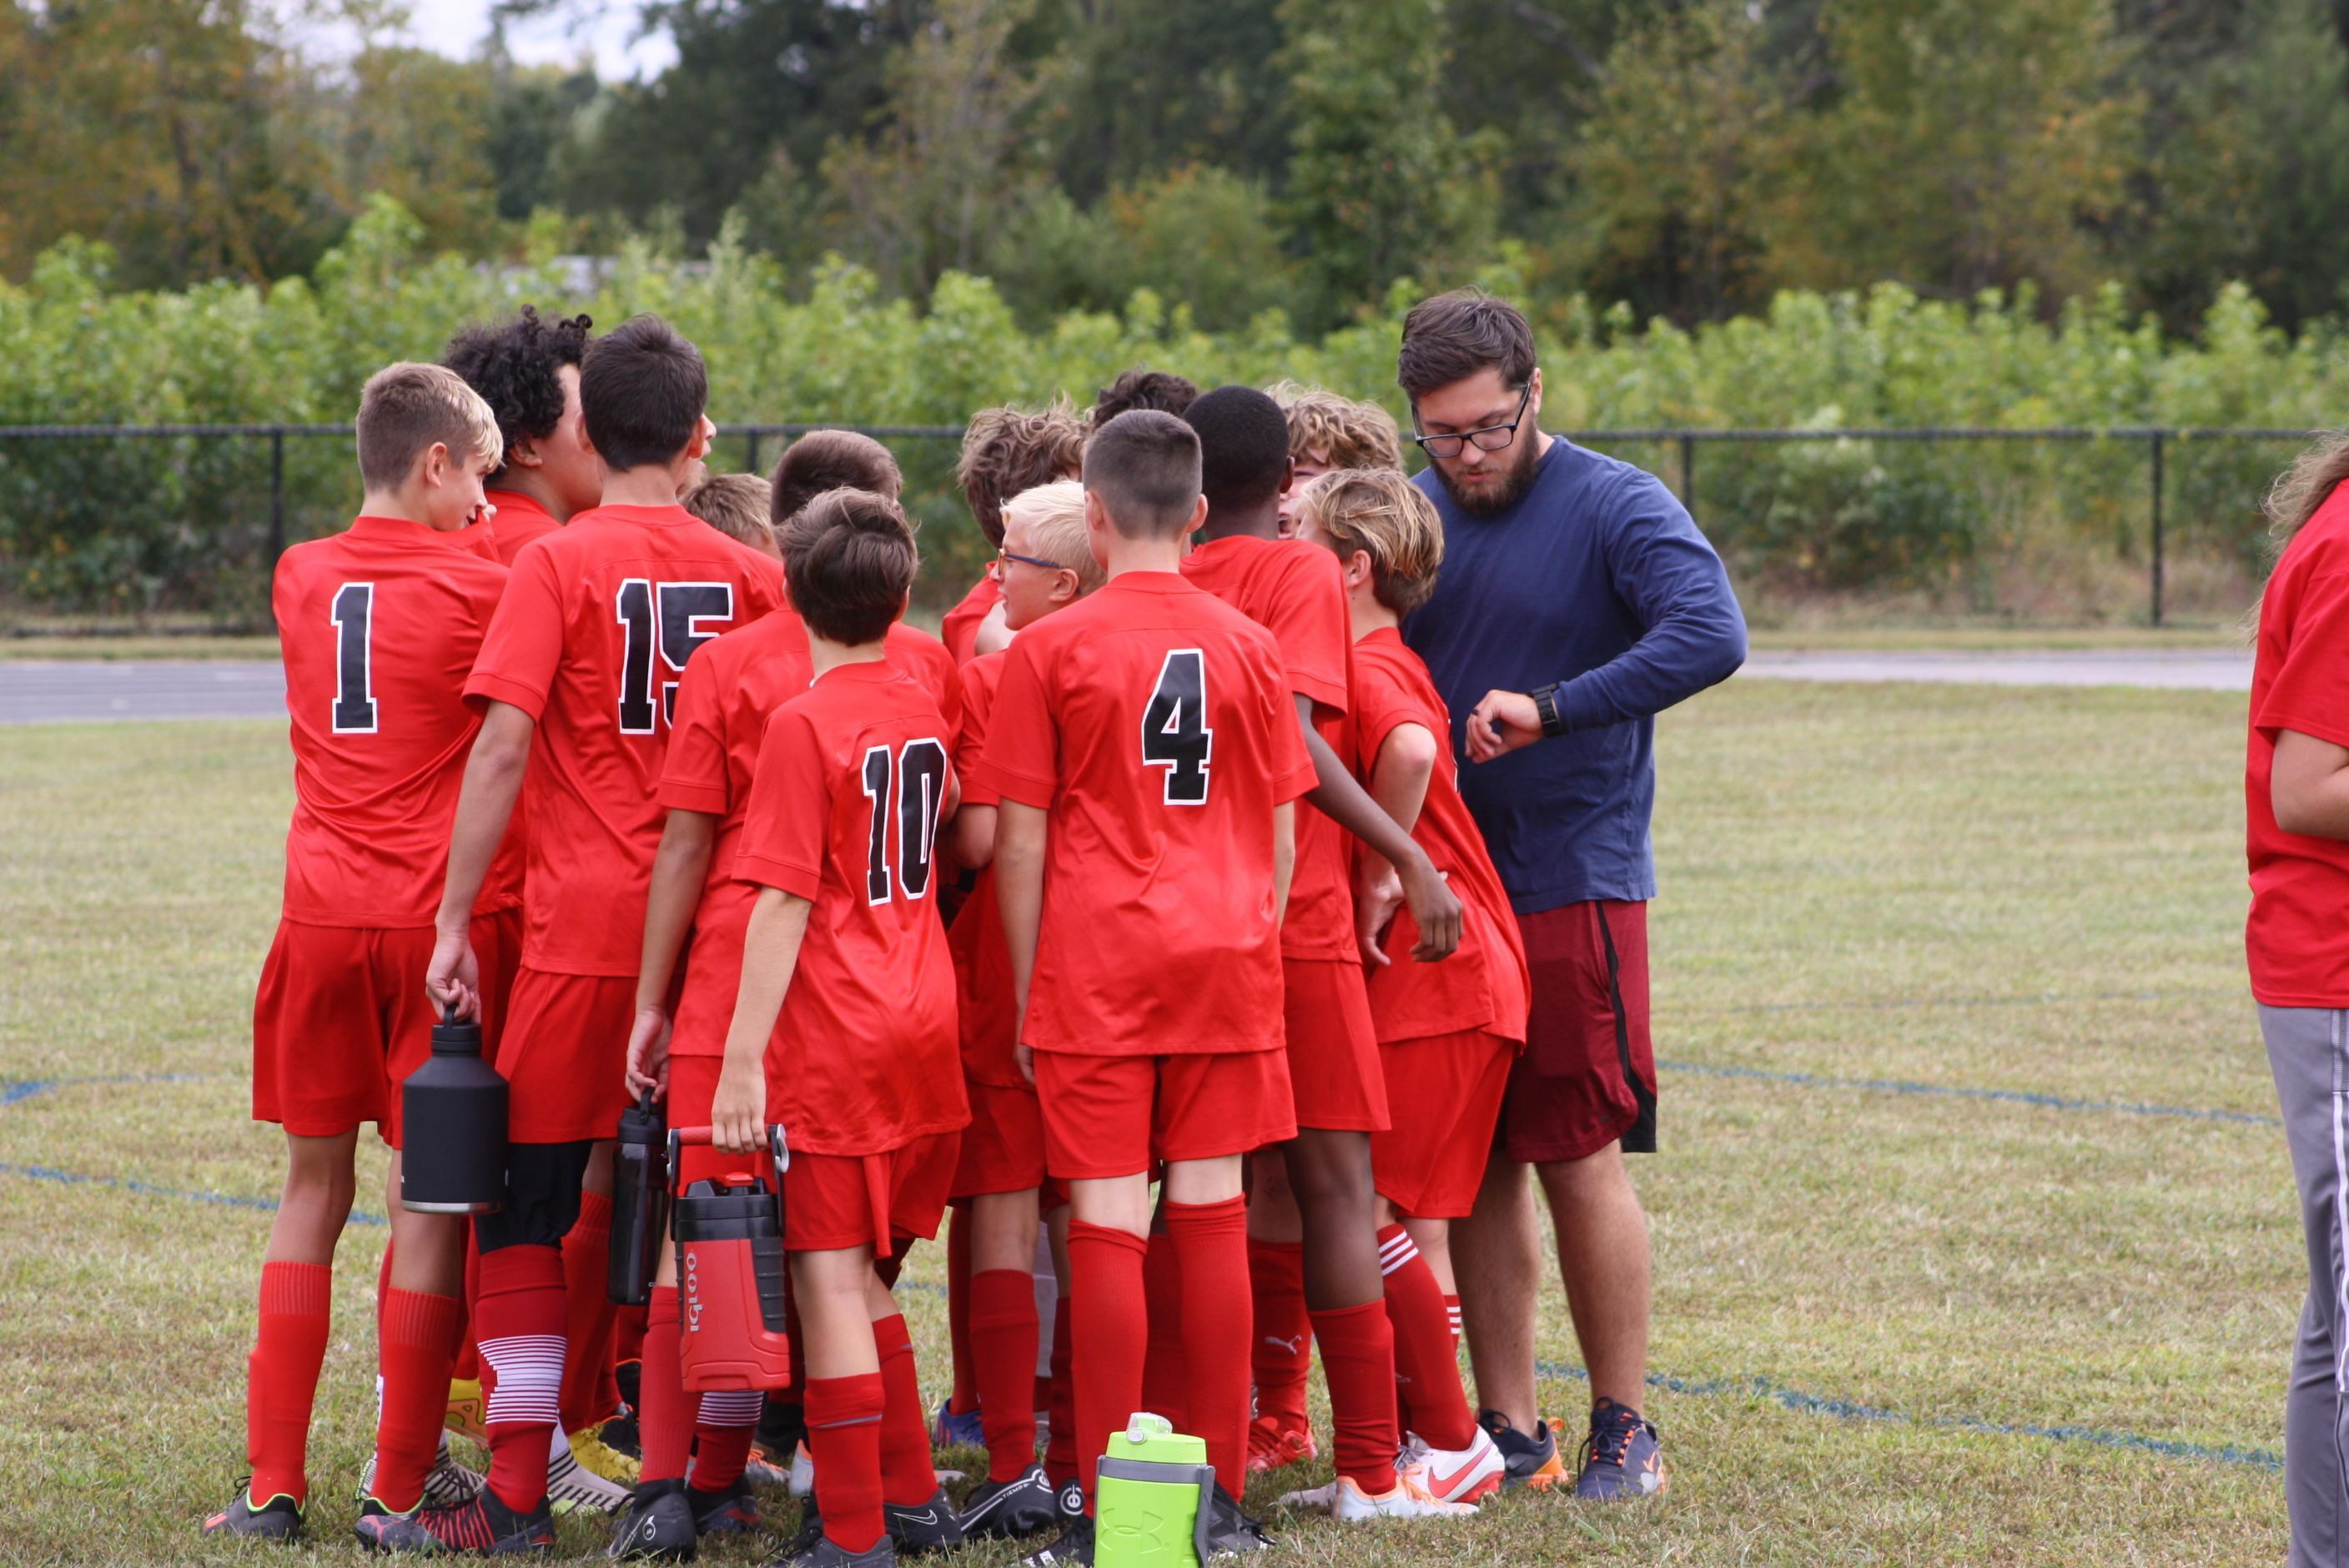 Boys soccer team receiving instructions from the coach